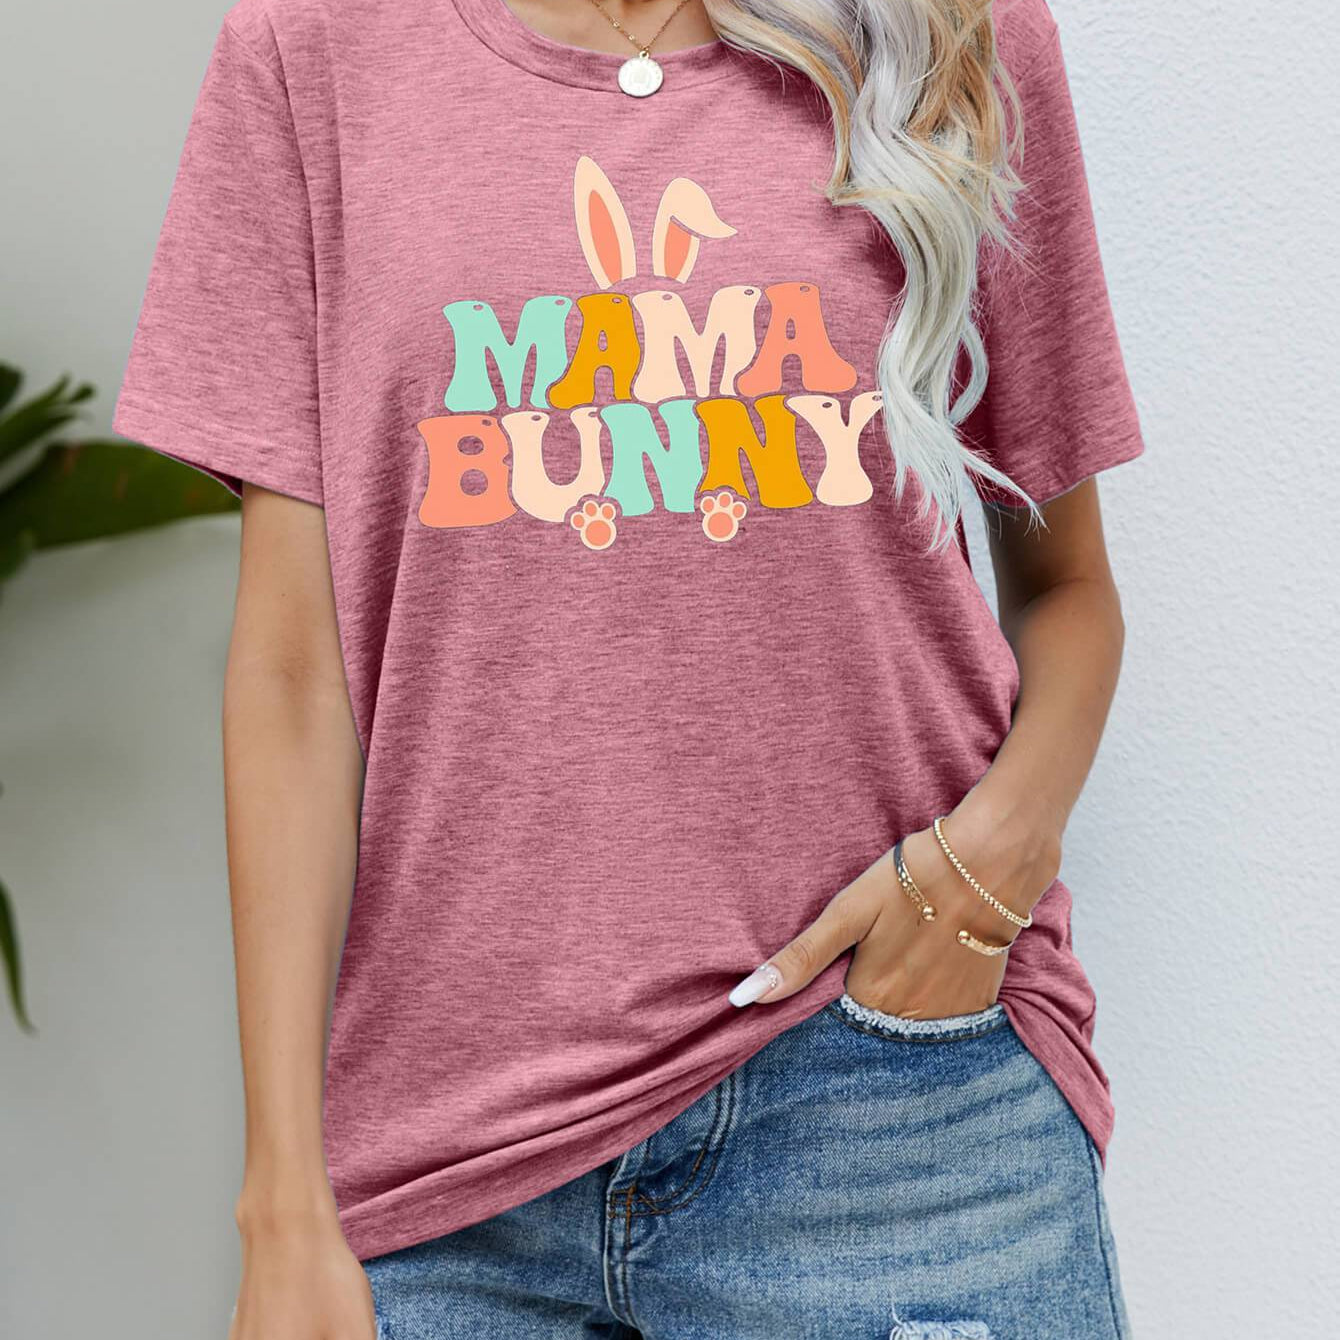 Easter MAMA BUNNY Tee Shirt - Celebrate Love, Life and New Beginnings with Style - Guy Christopher